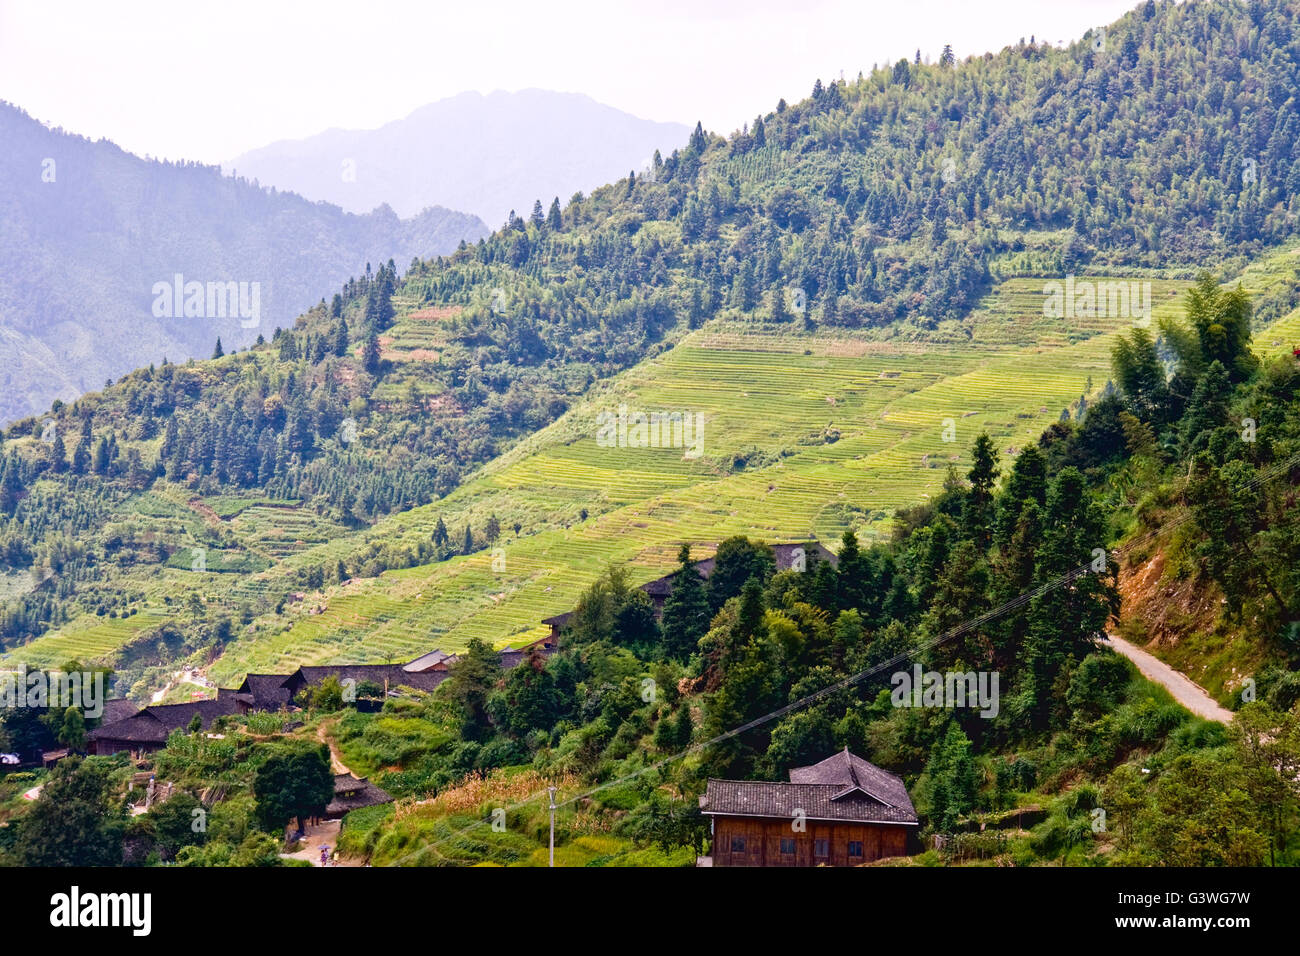 Village and rice terraces on the mountains. Stock Photo